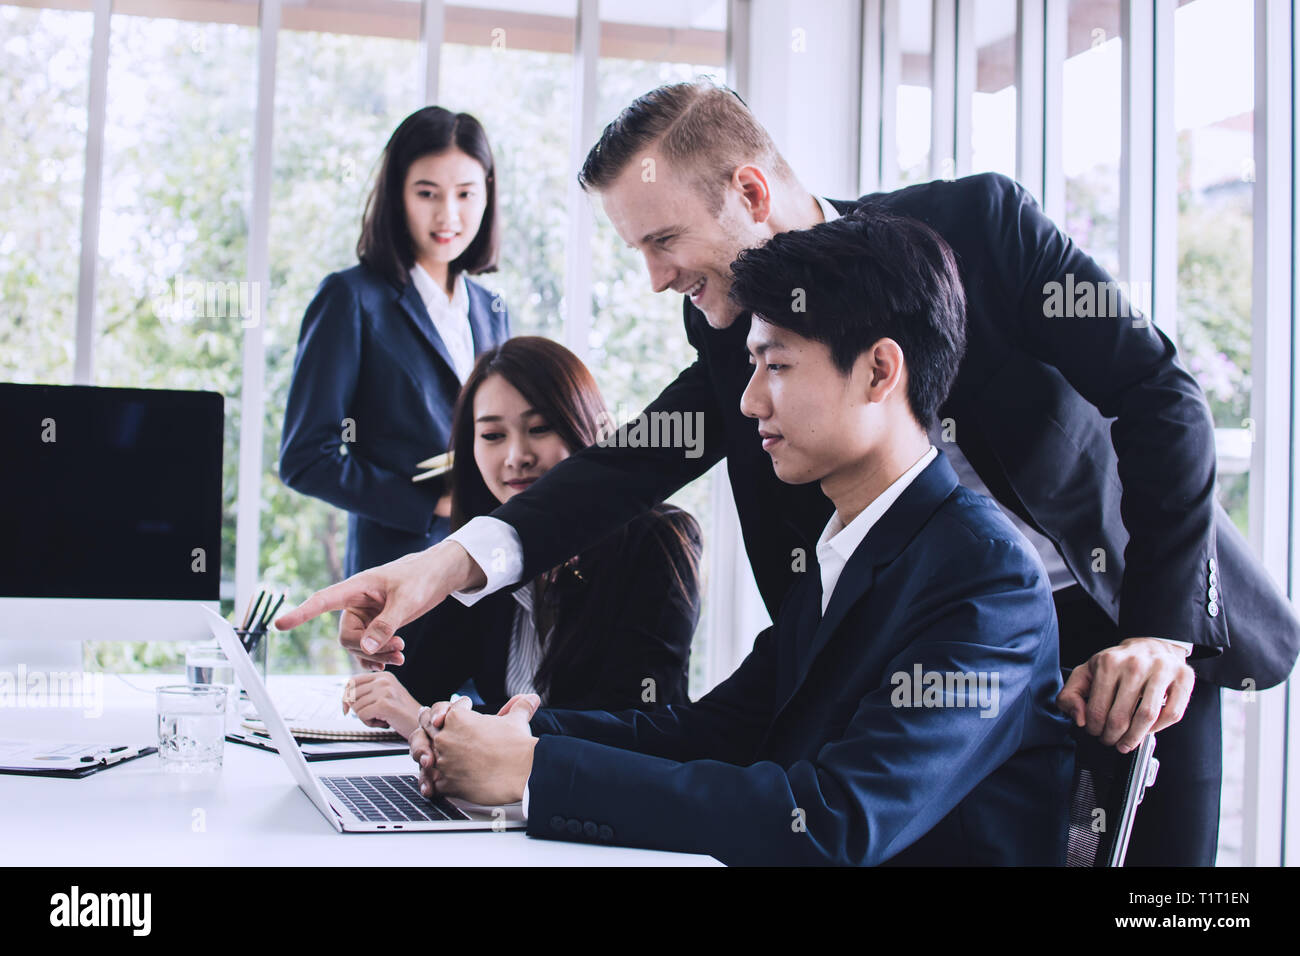 Creative meeting and brain storming with professional leader, business man talking with  people in office Stock Photo